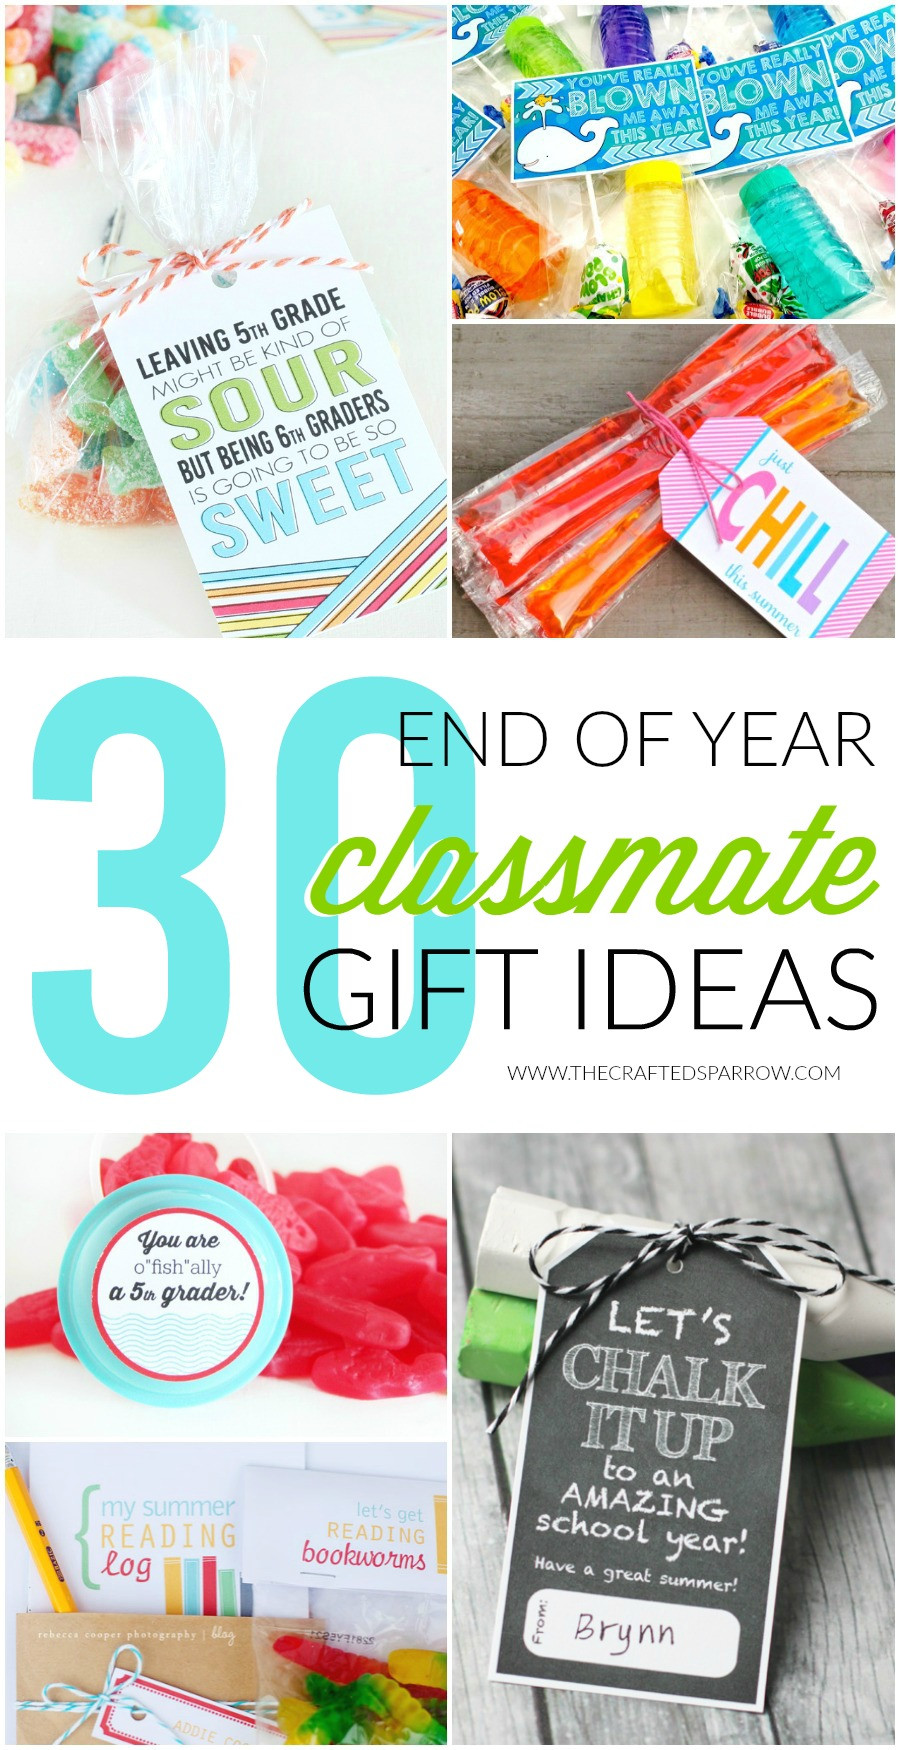 6Th Grade Christmas Party Ideas
 30 End of Year Class Gift Ideas